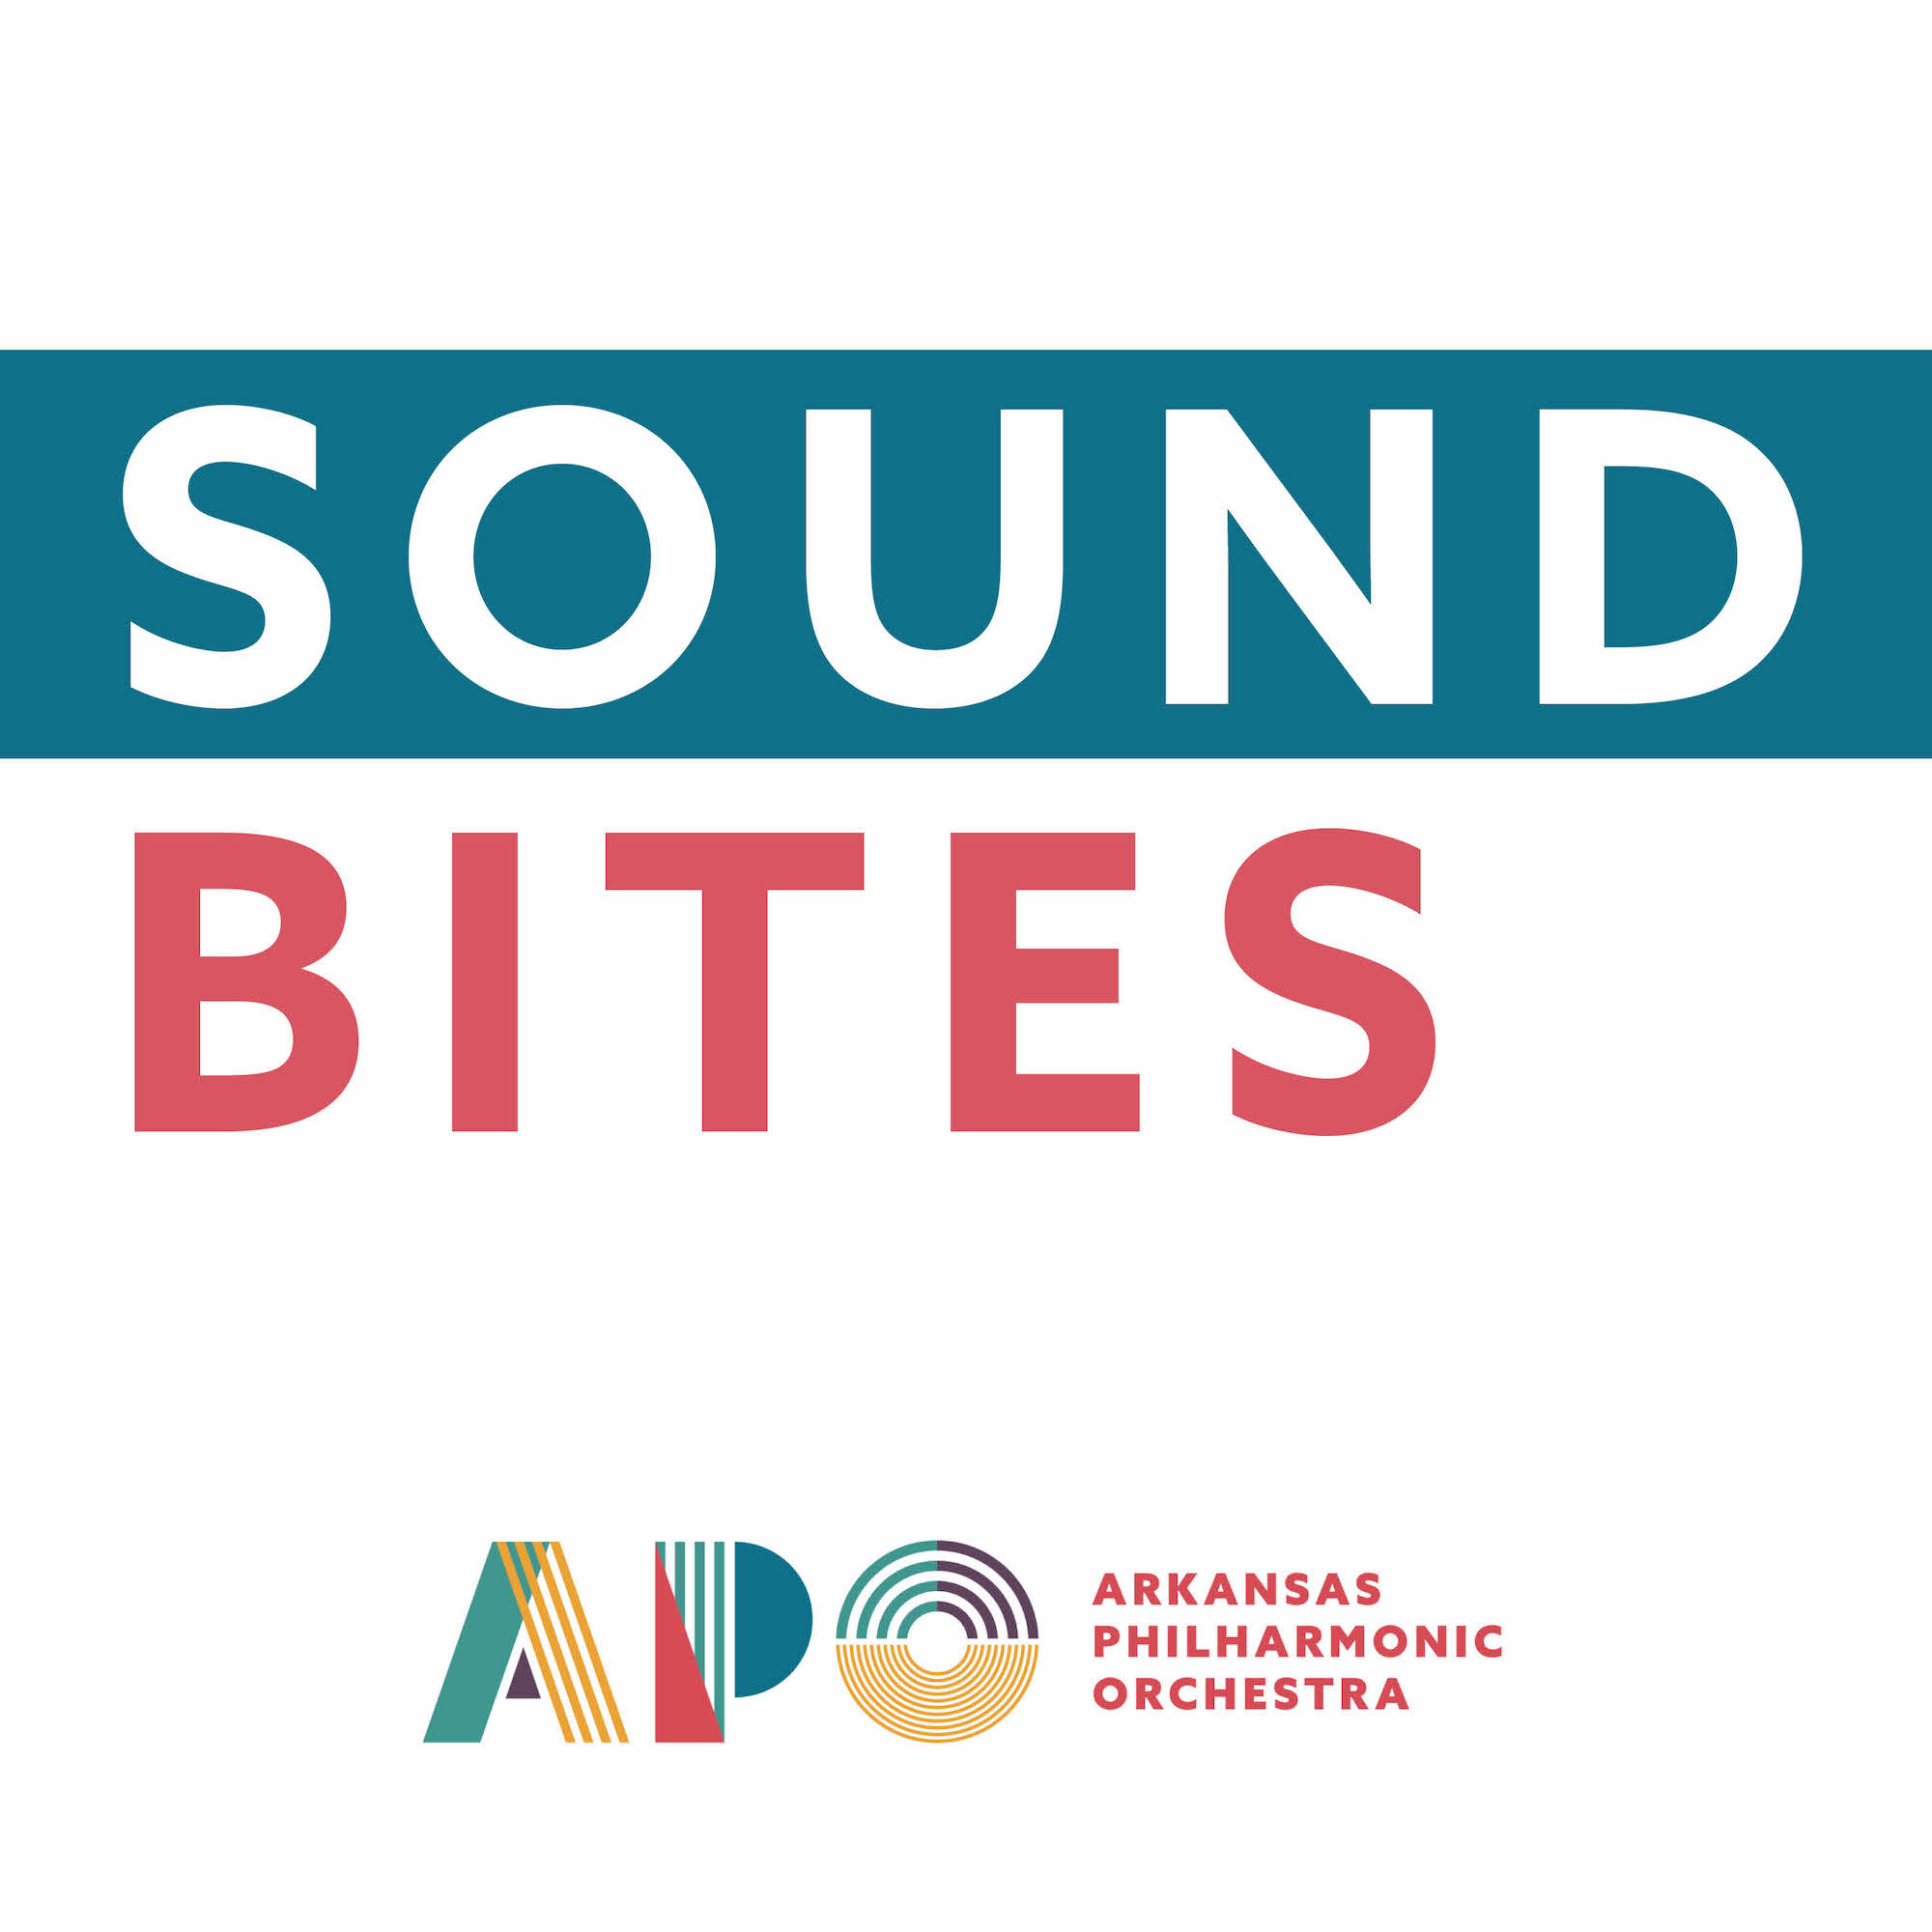 Sound Bites From the Arkansas Philharmonic Orchestra